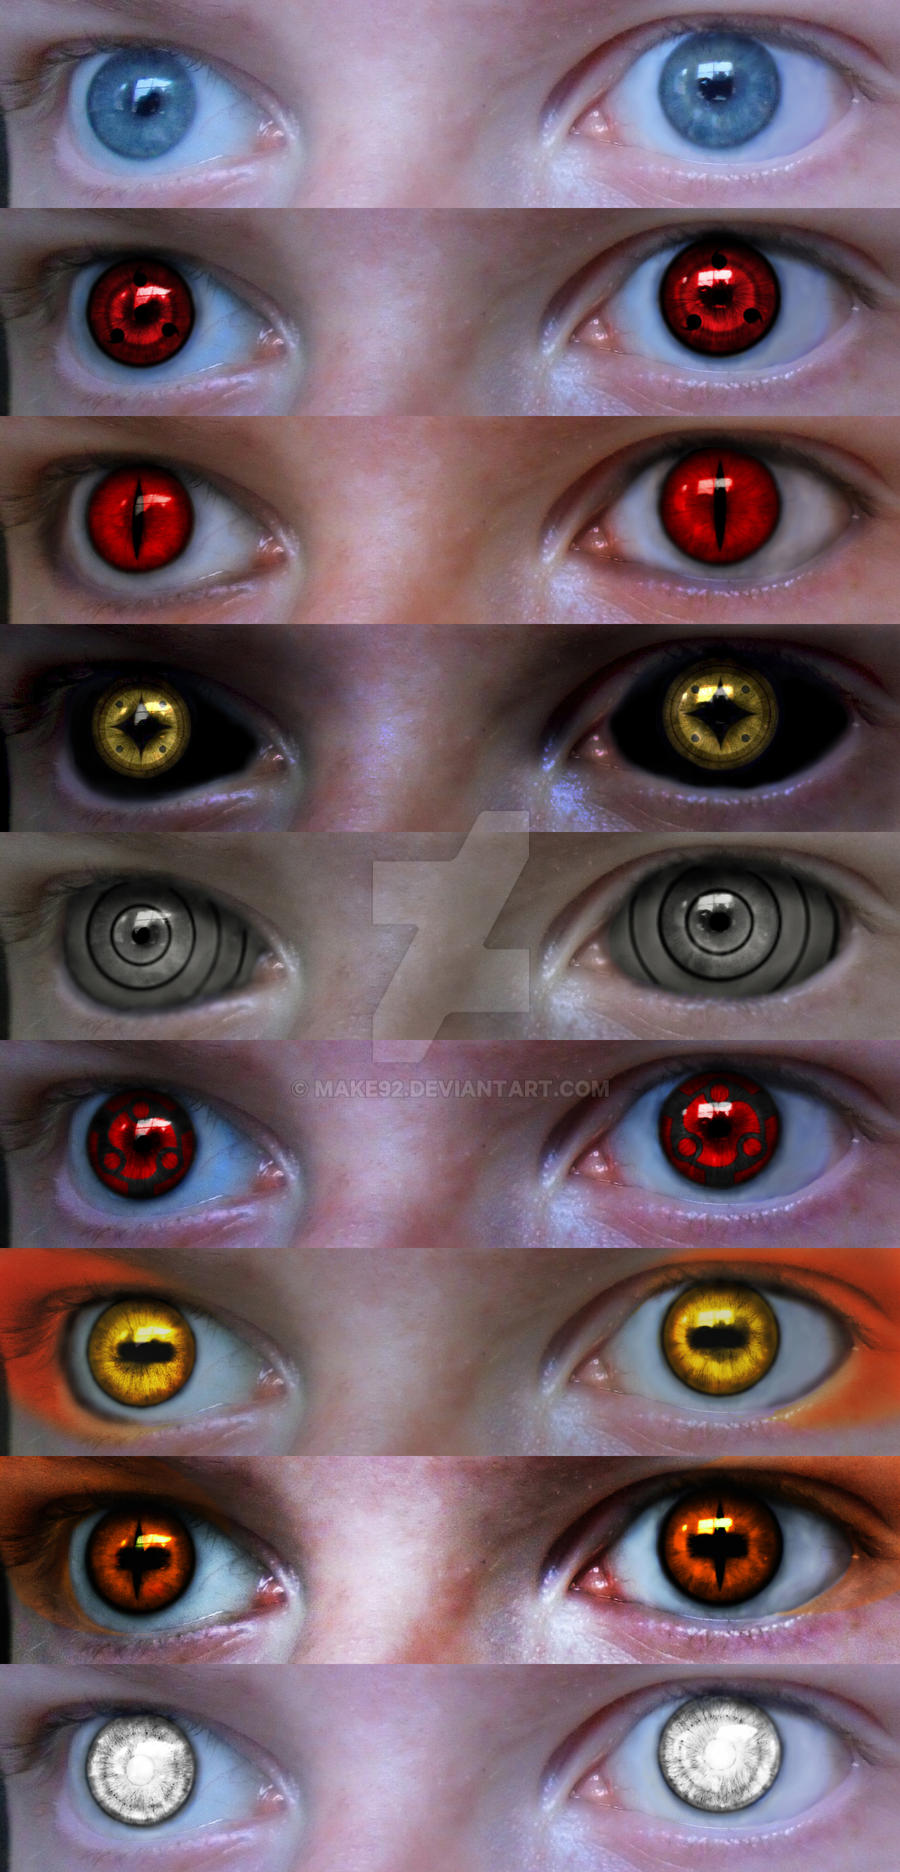 Naruto Eyes by Andyx6xImpact on DeviantArt